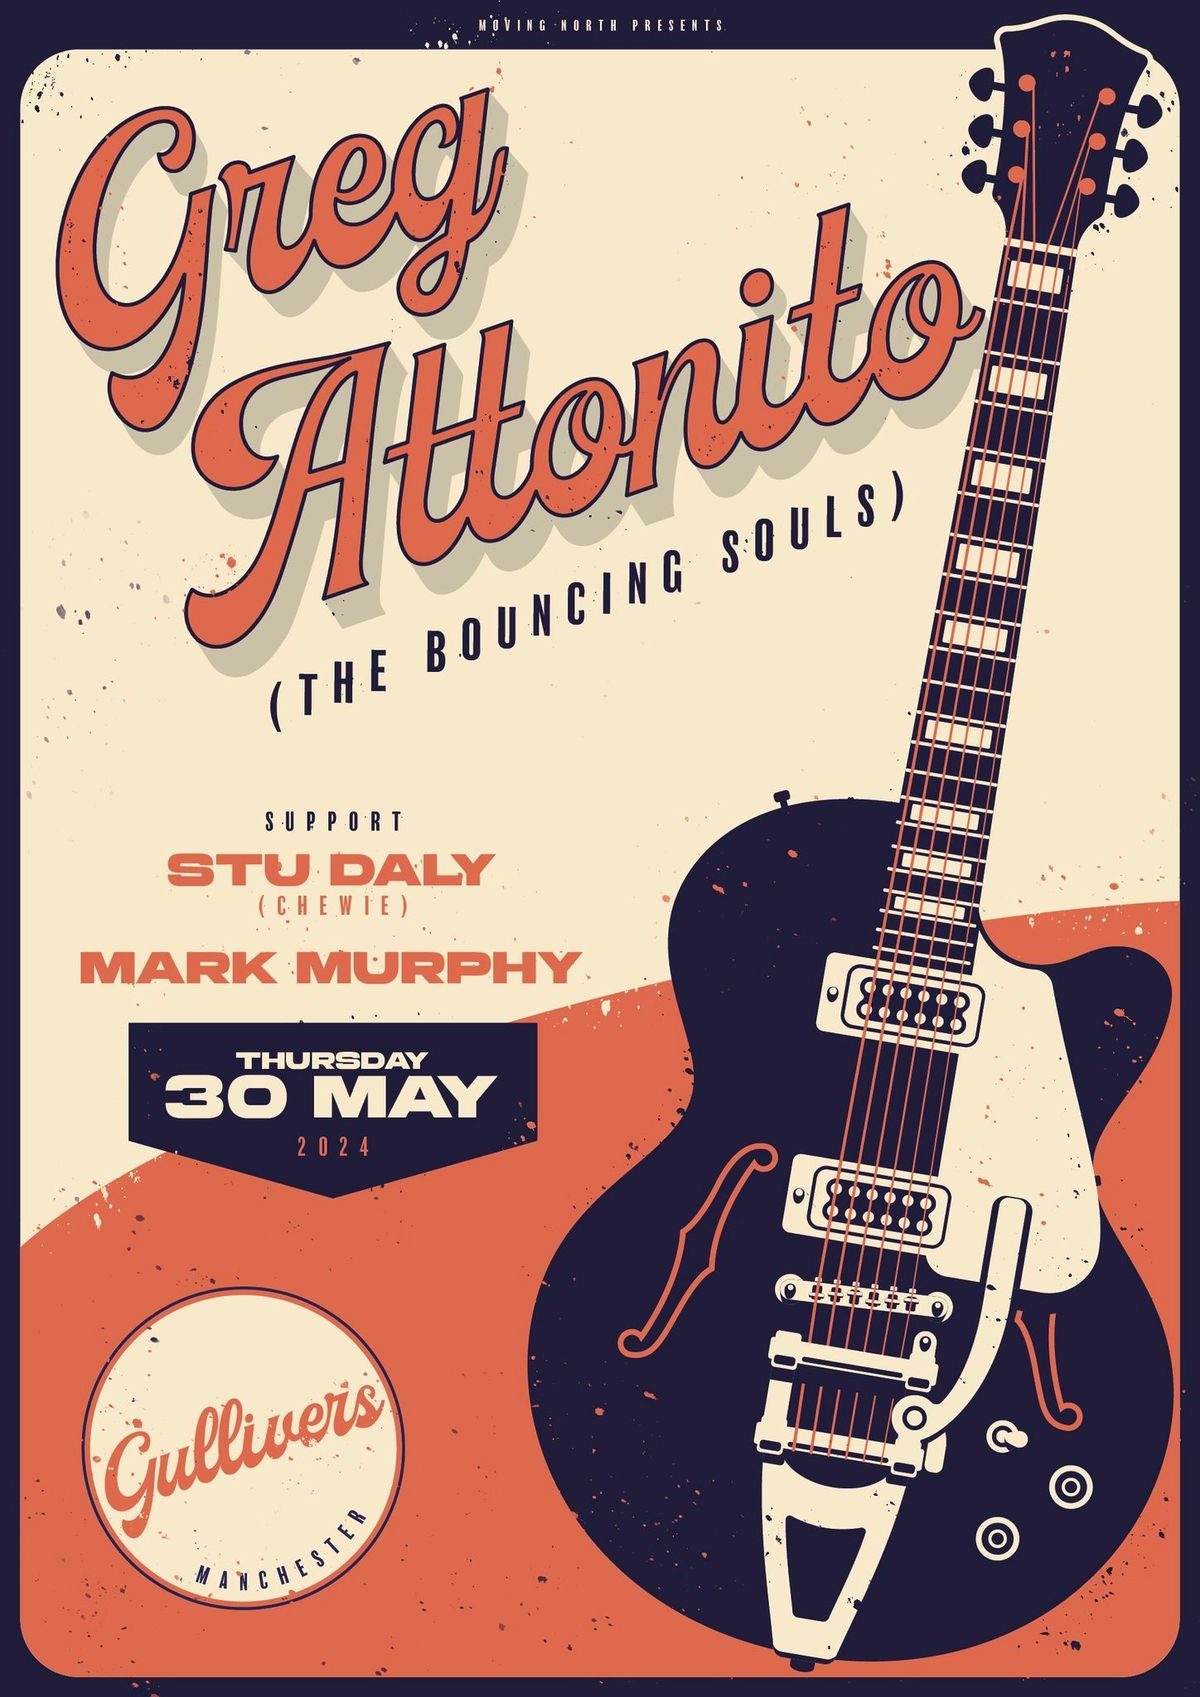 Greg Attonito (The Bouncing Souls) - Gullivers, Manchester - Thursday 30th May 2024